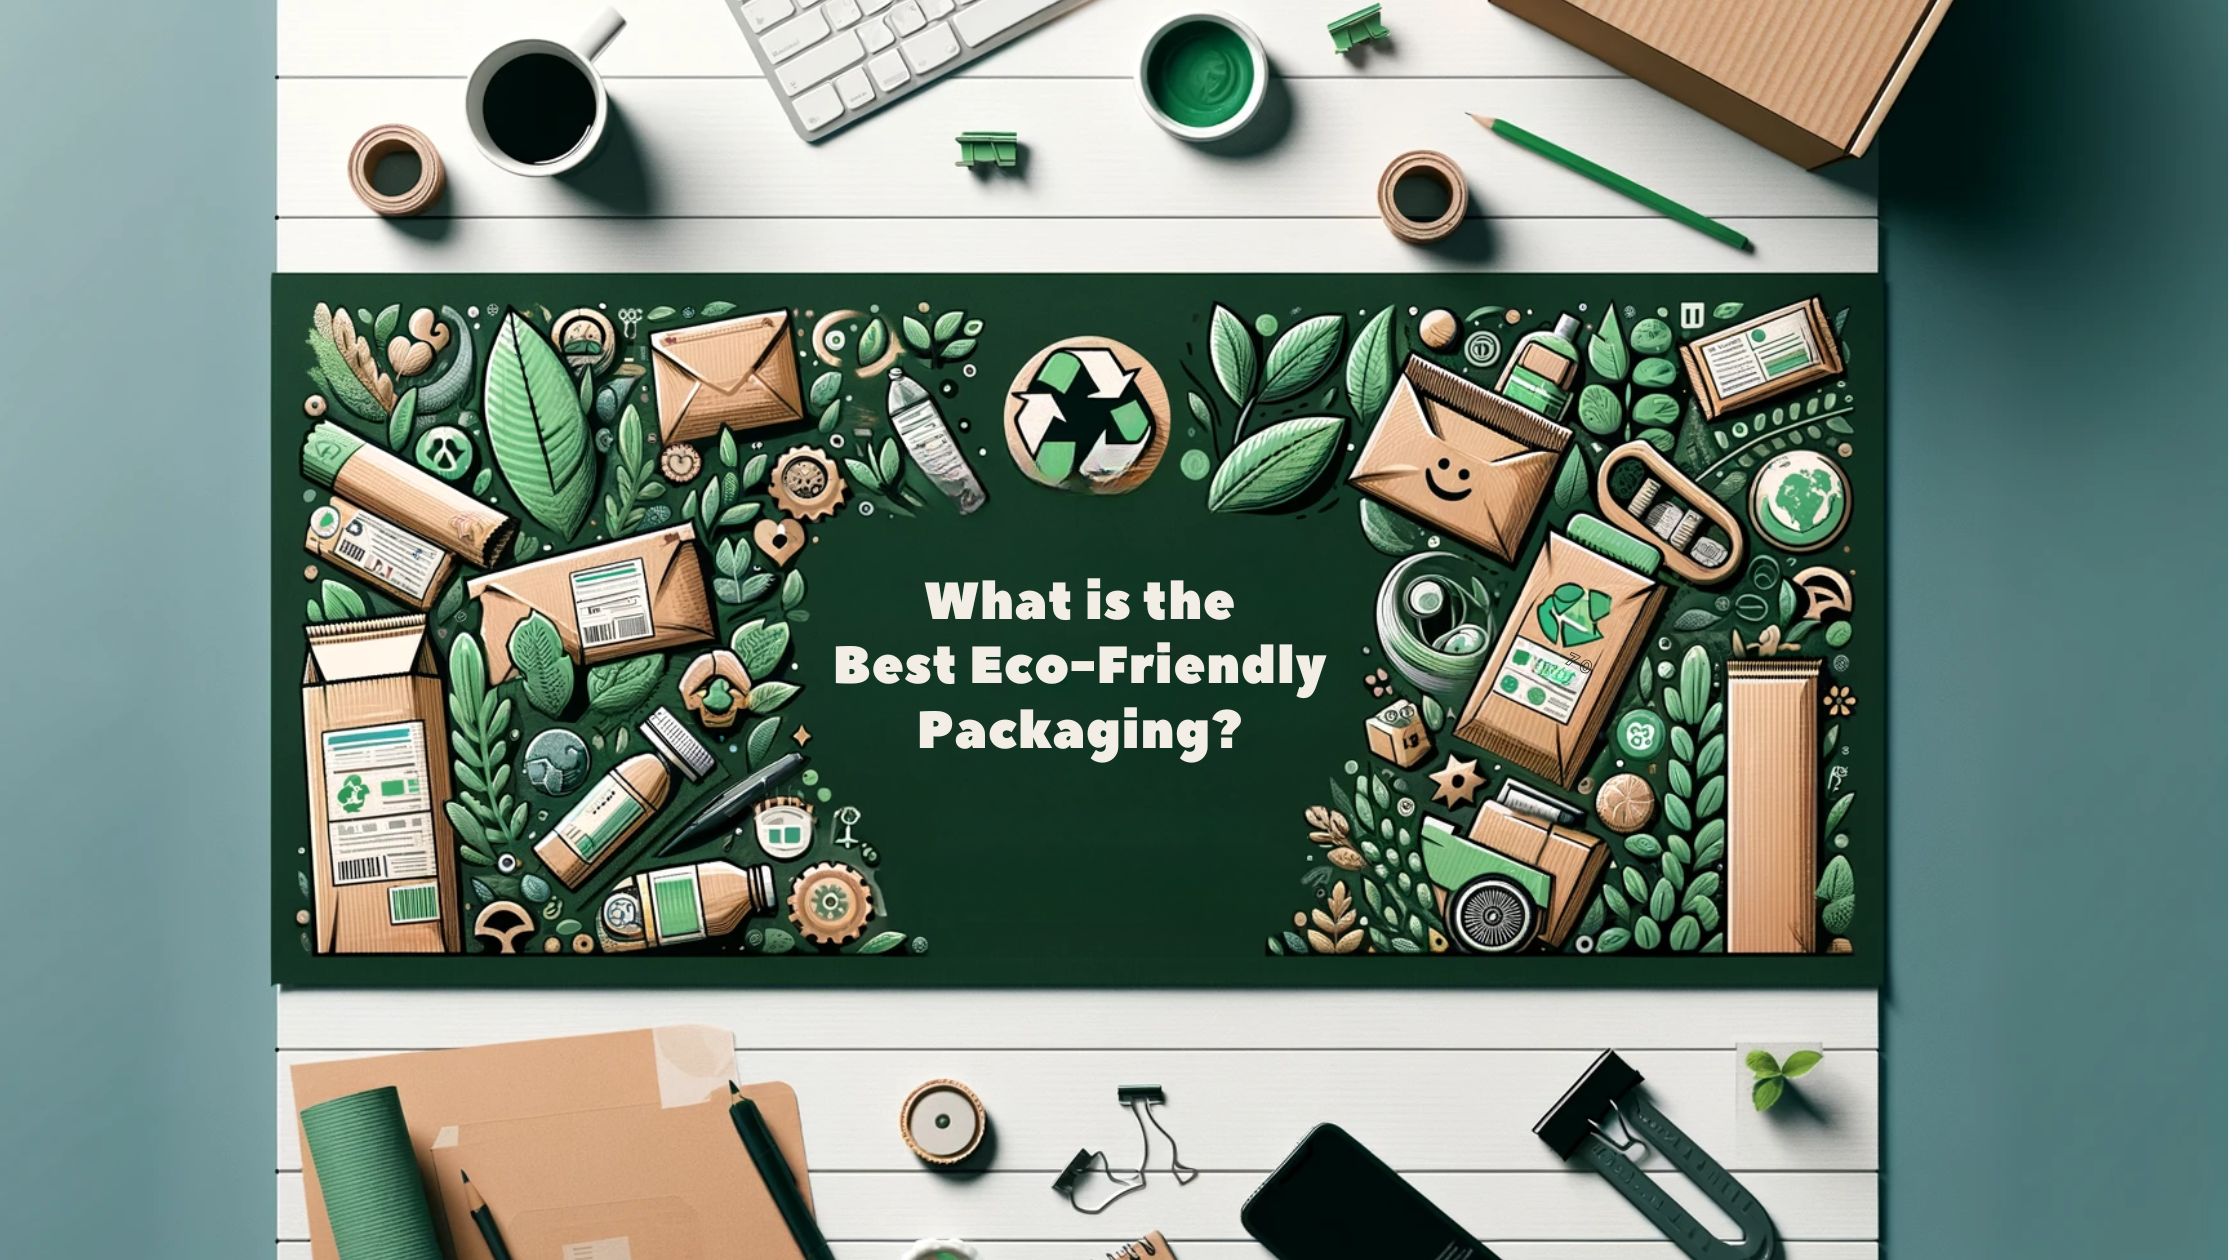 What is the Best Eco-Friendly Packaging?